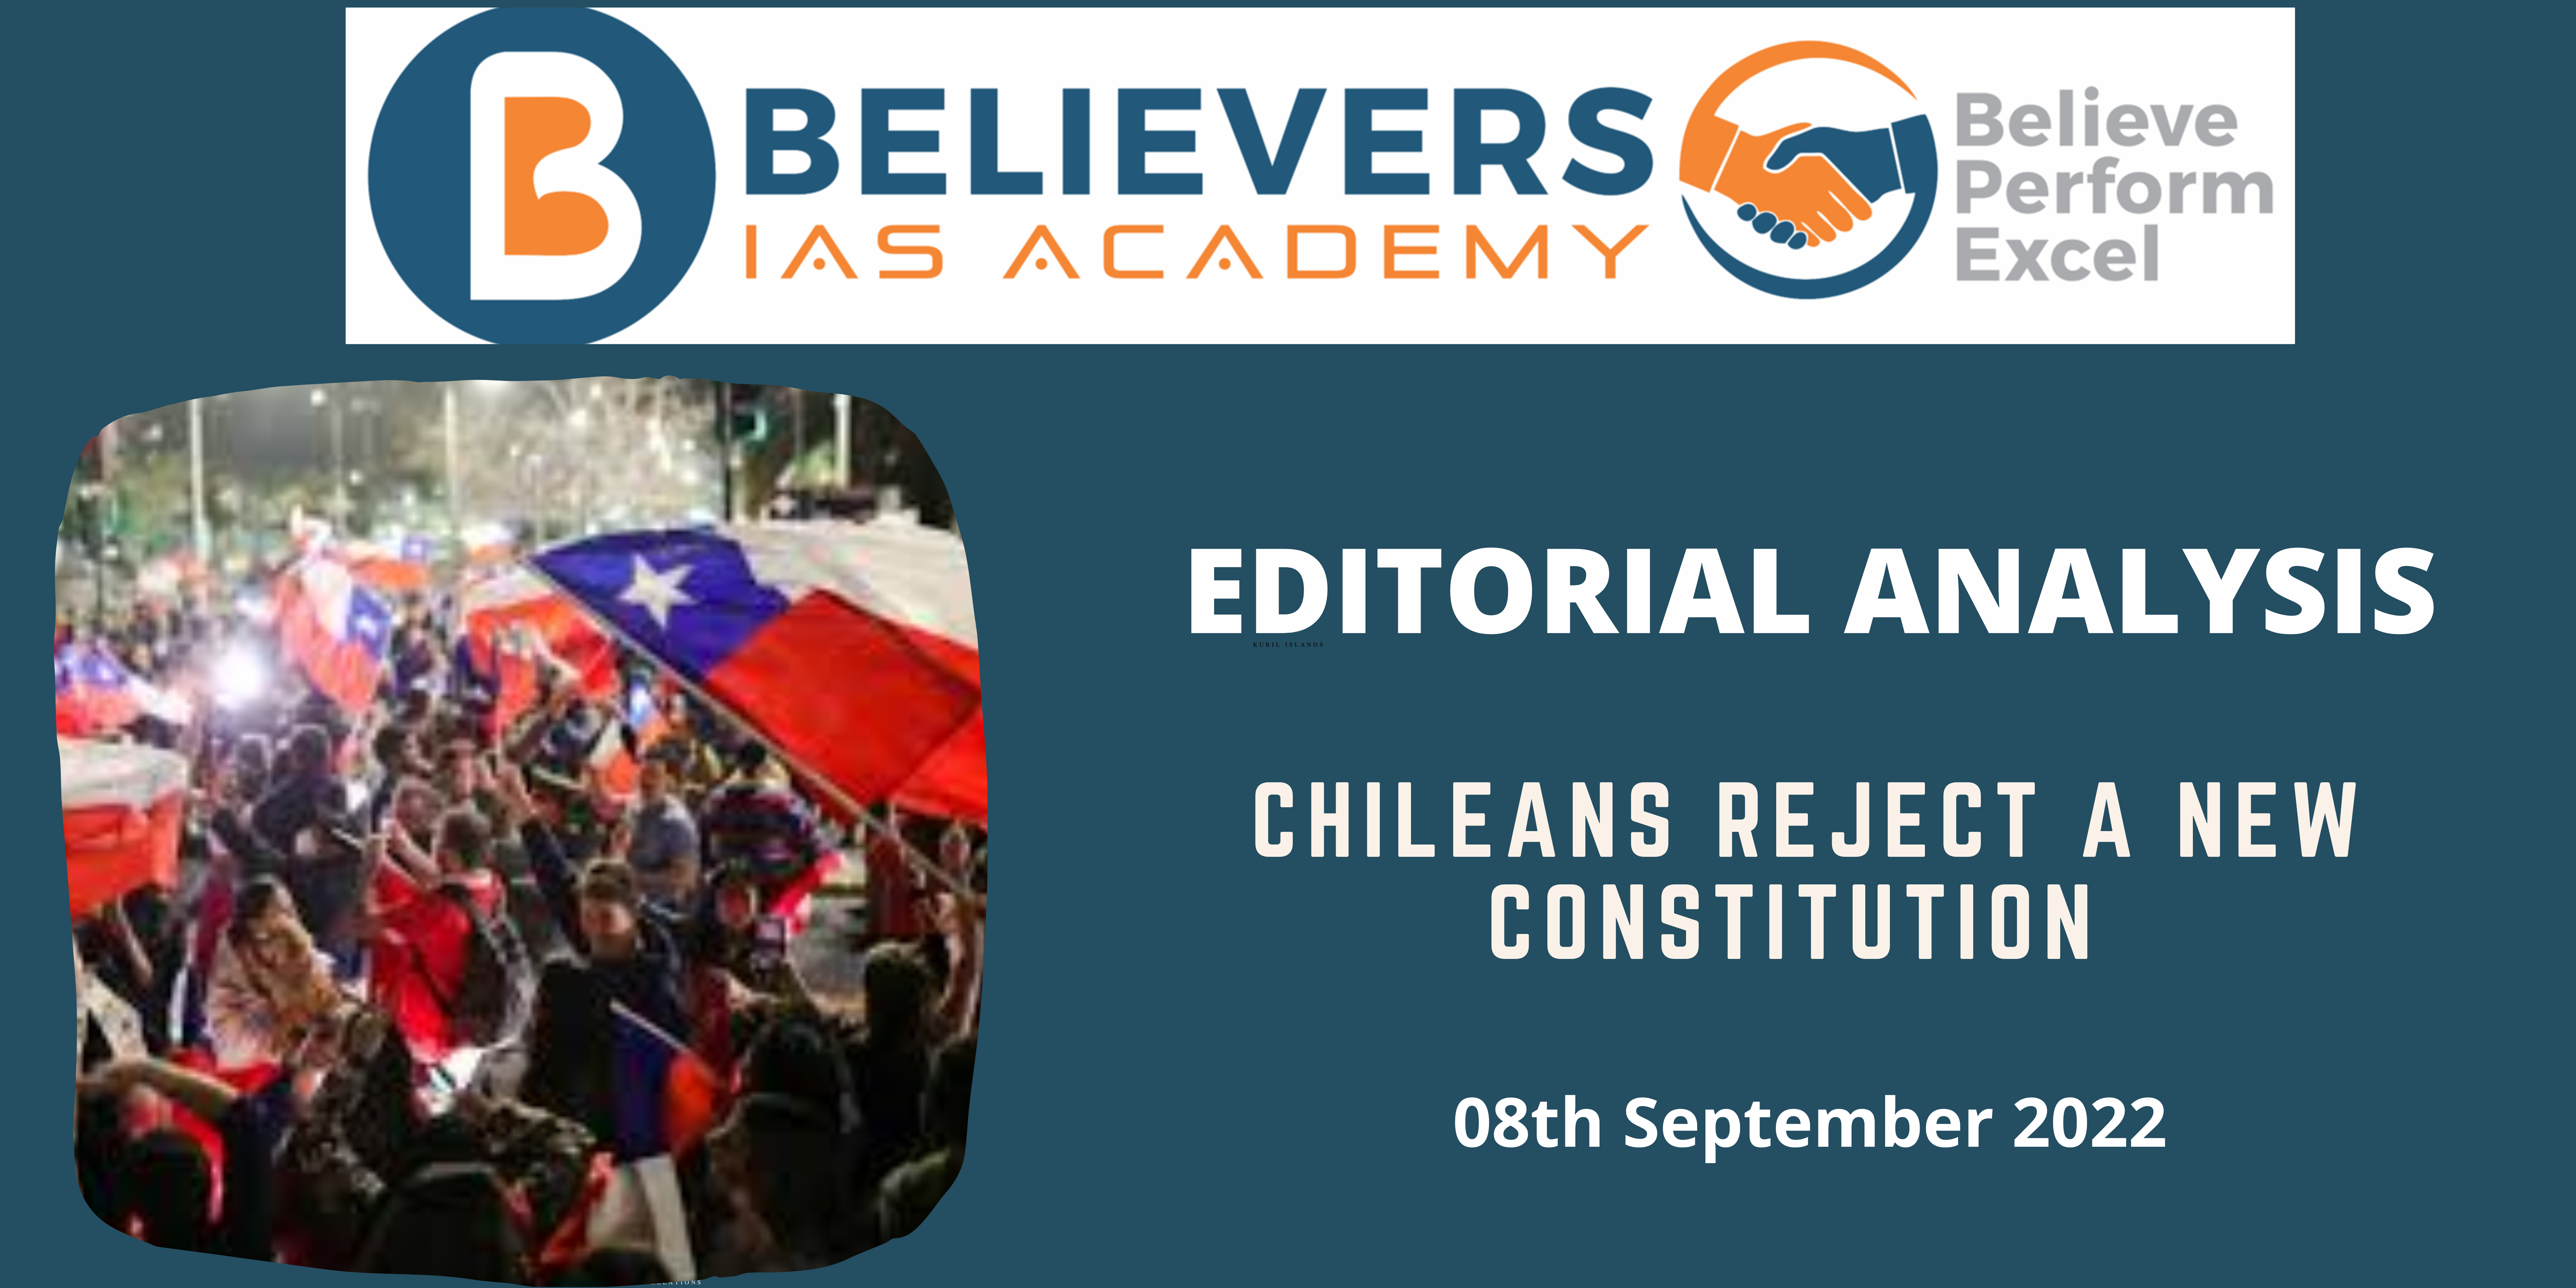 Chileans Reject a New Constitution